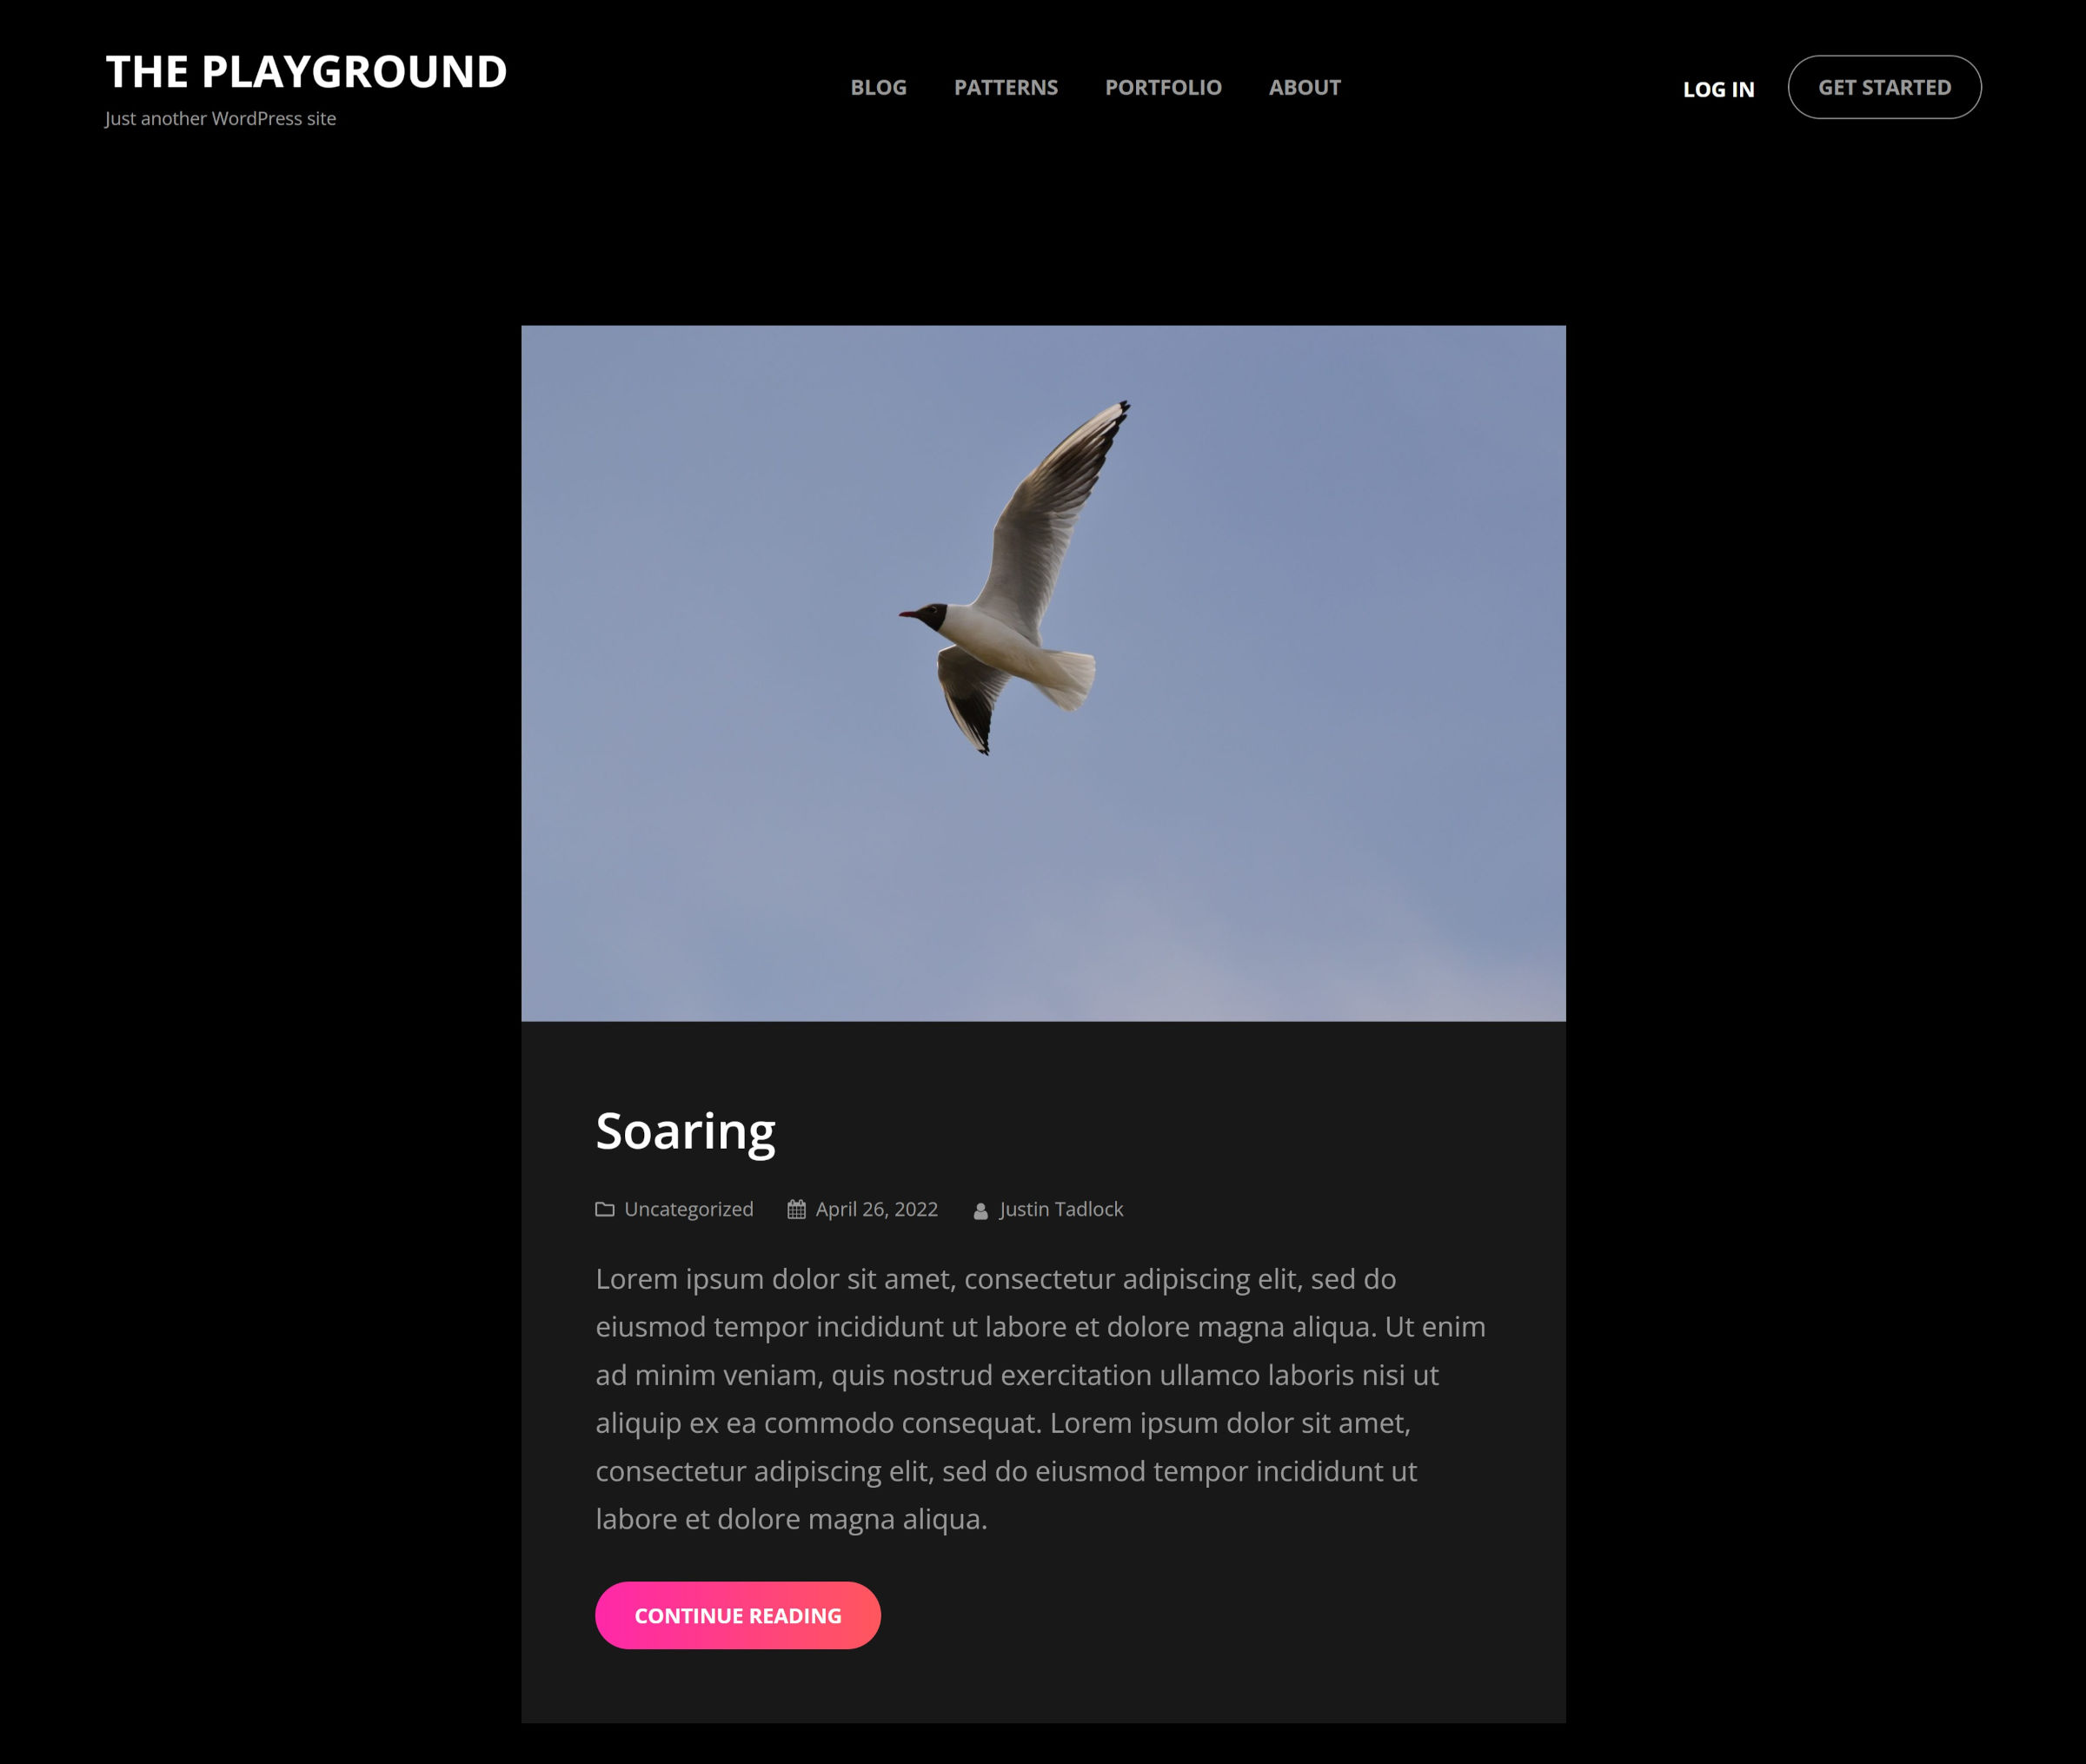 Dark WordPress theme design that shows a header and a blog post excerpt with a featured image of a bird.